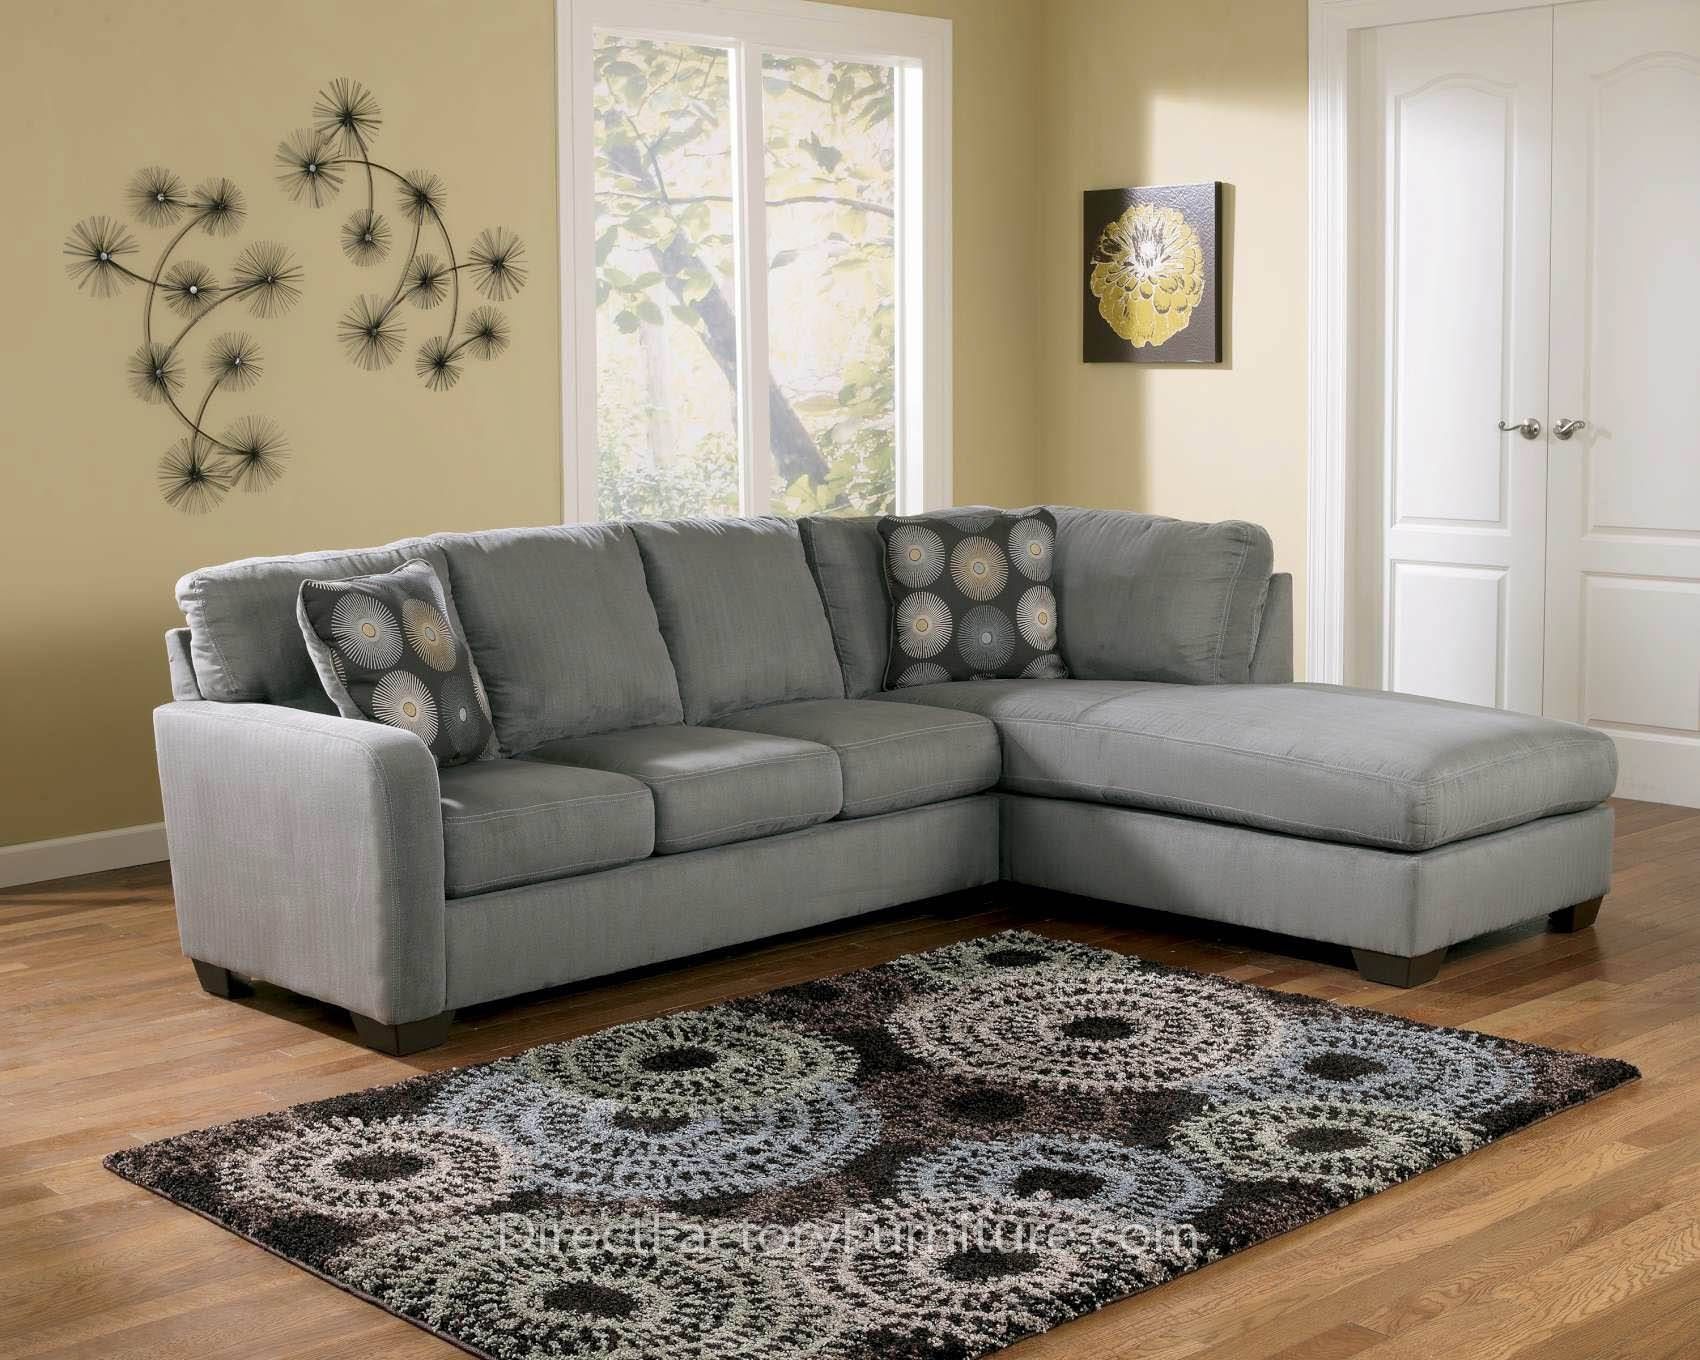 Decorating: Elite Small L Shaped Couch As Sectional Sofa Ash Grey Regarding Small L Shaped Sofas (View 15 of 15)